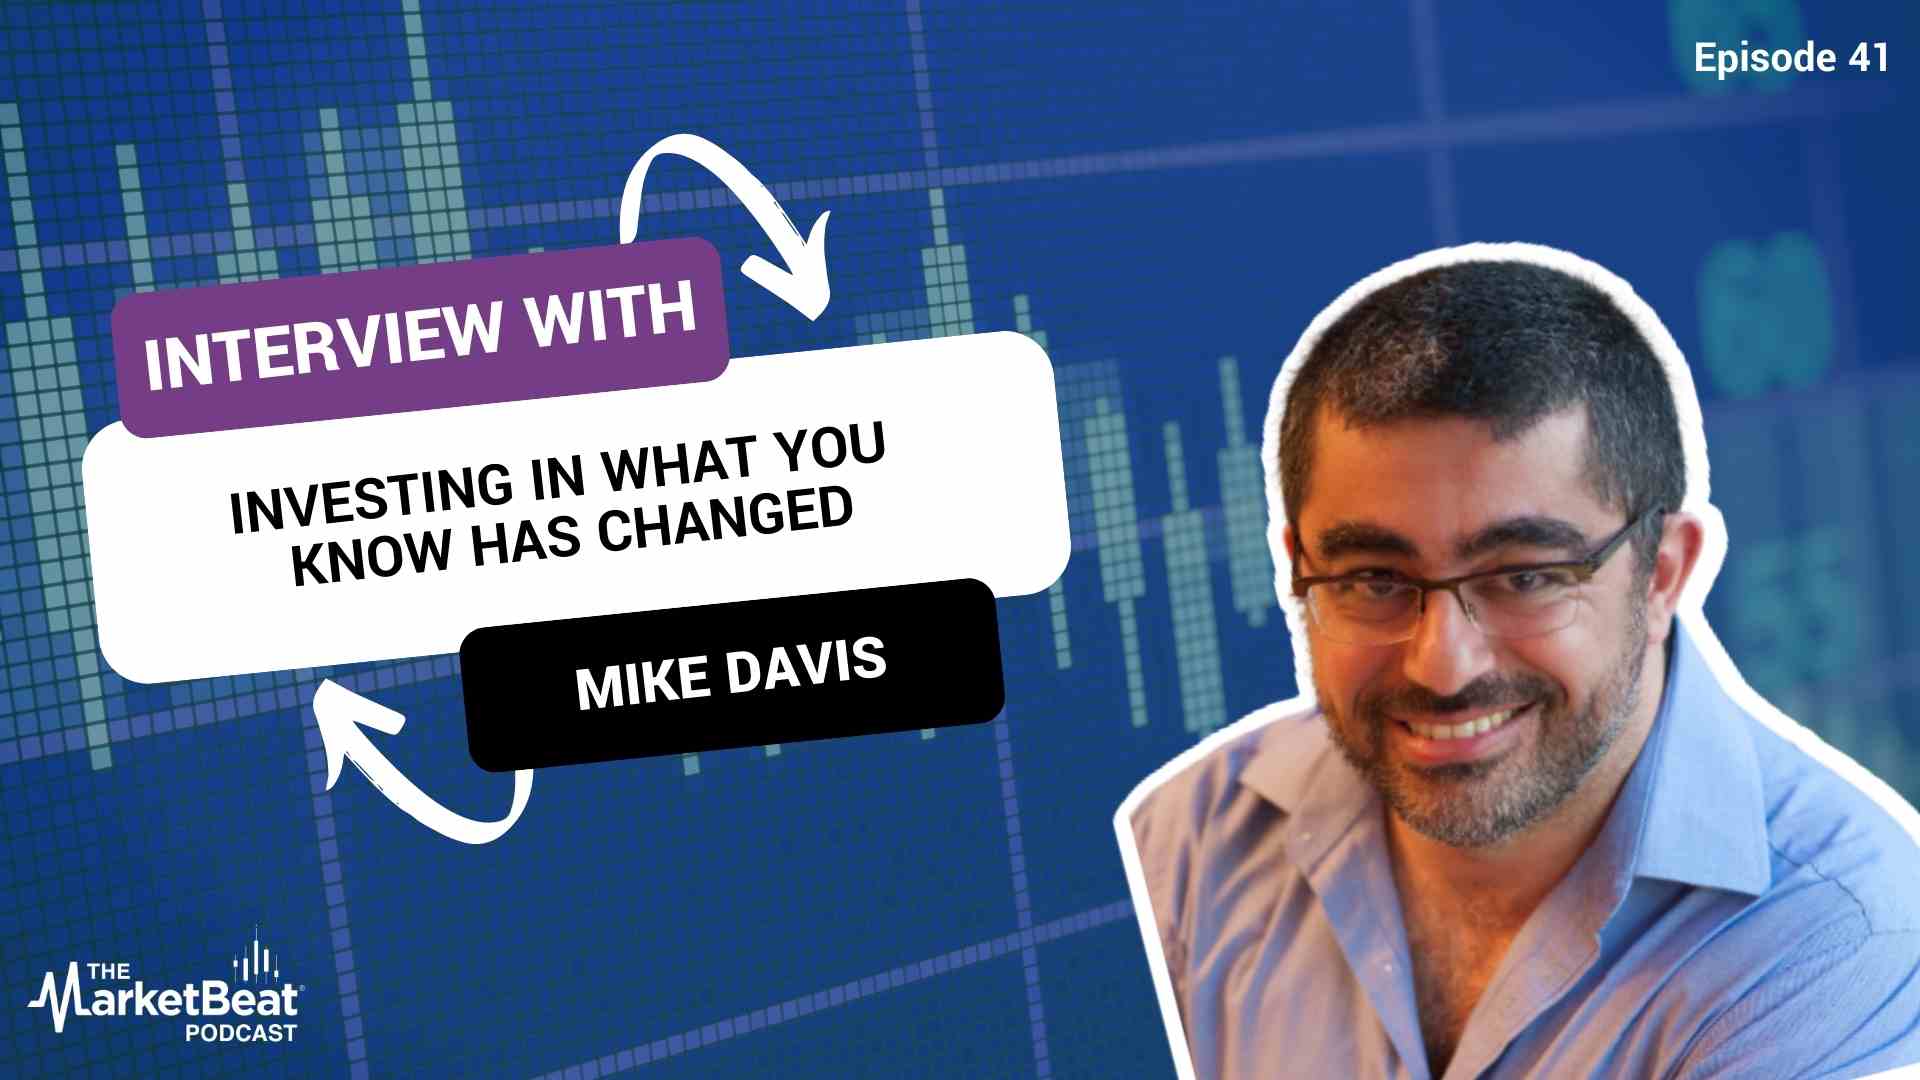 Investing in What You Know Has Changed (Episode 41)